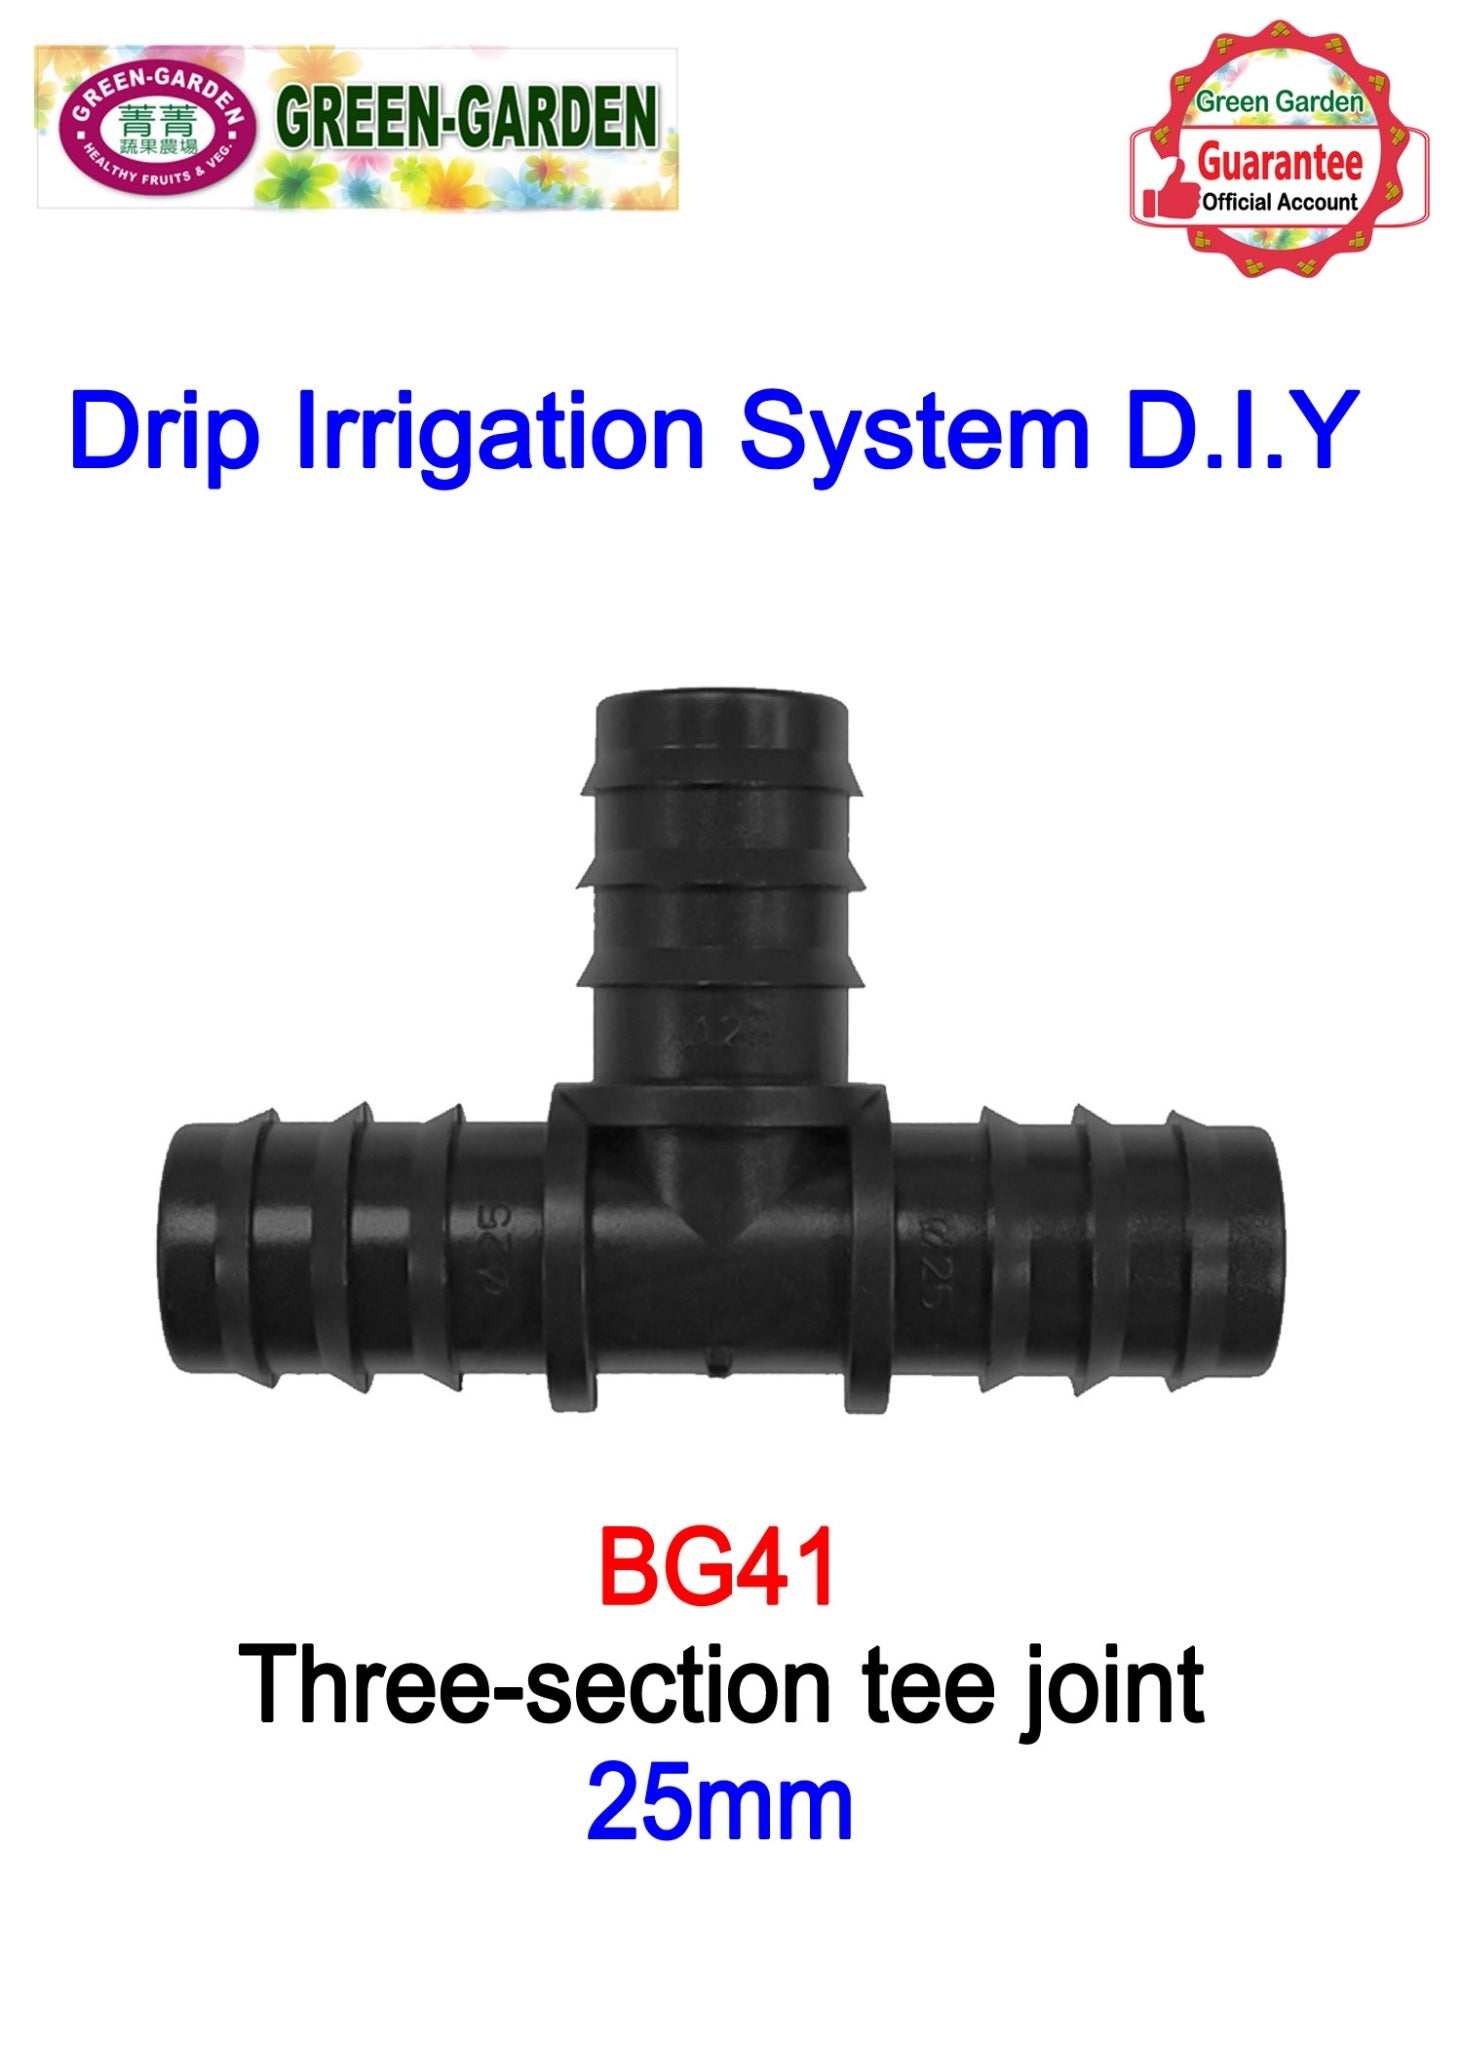 Drip Irrigation System - 25mm three-section tee joint BG41